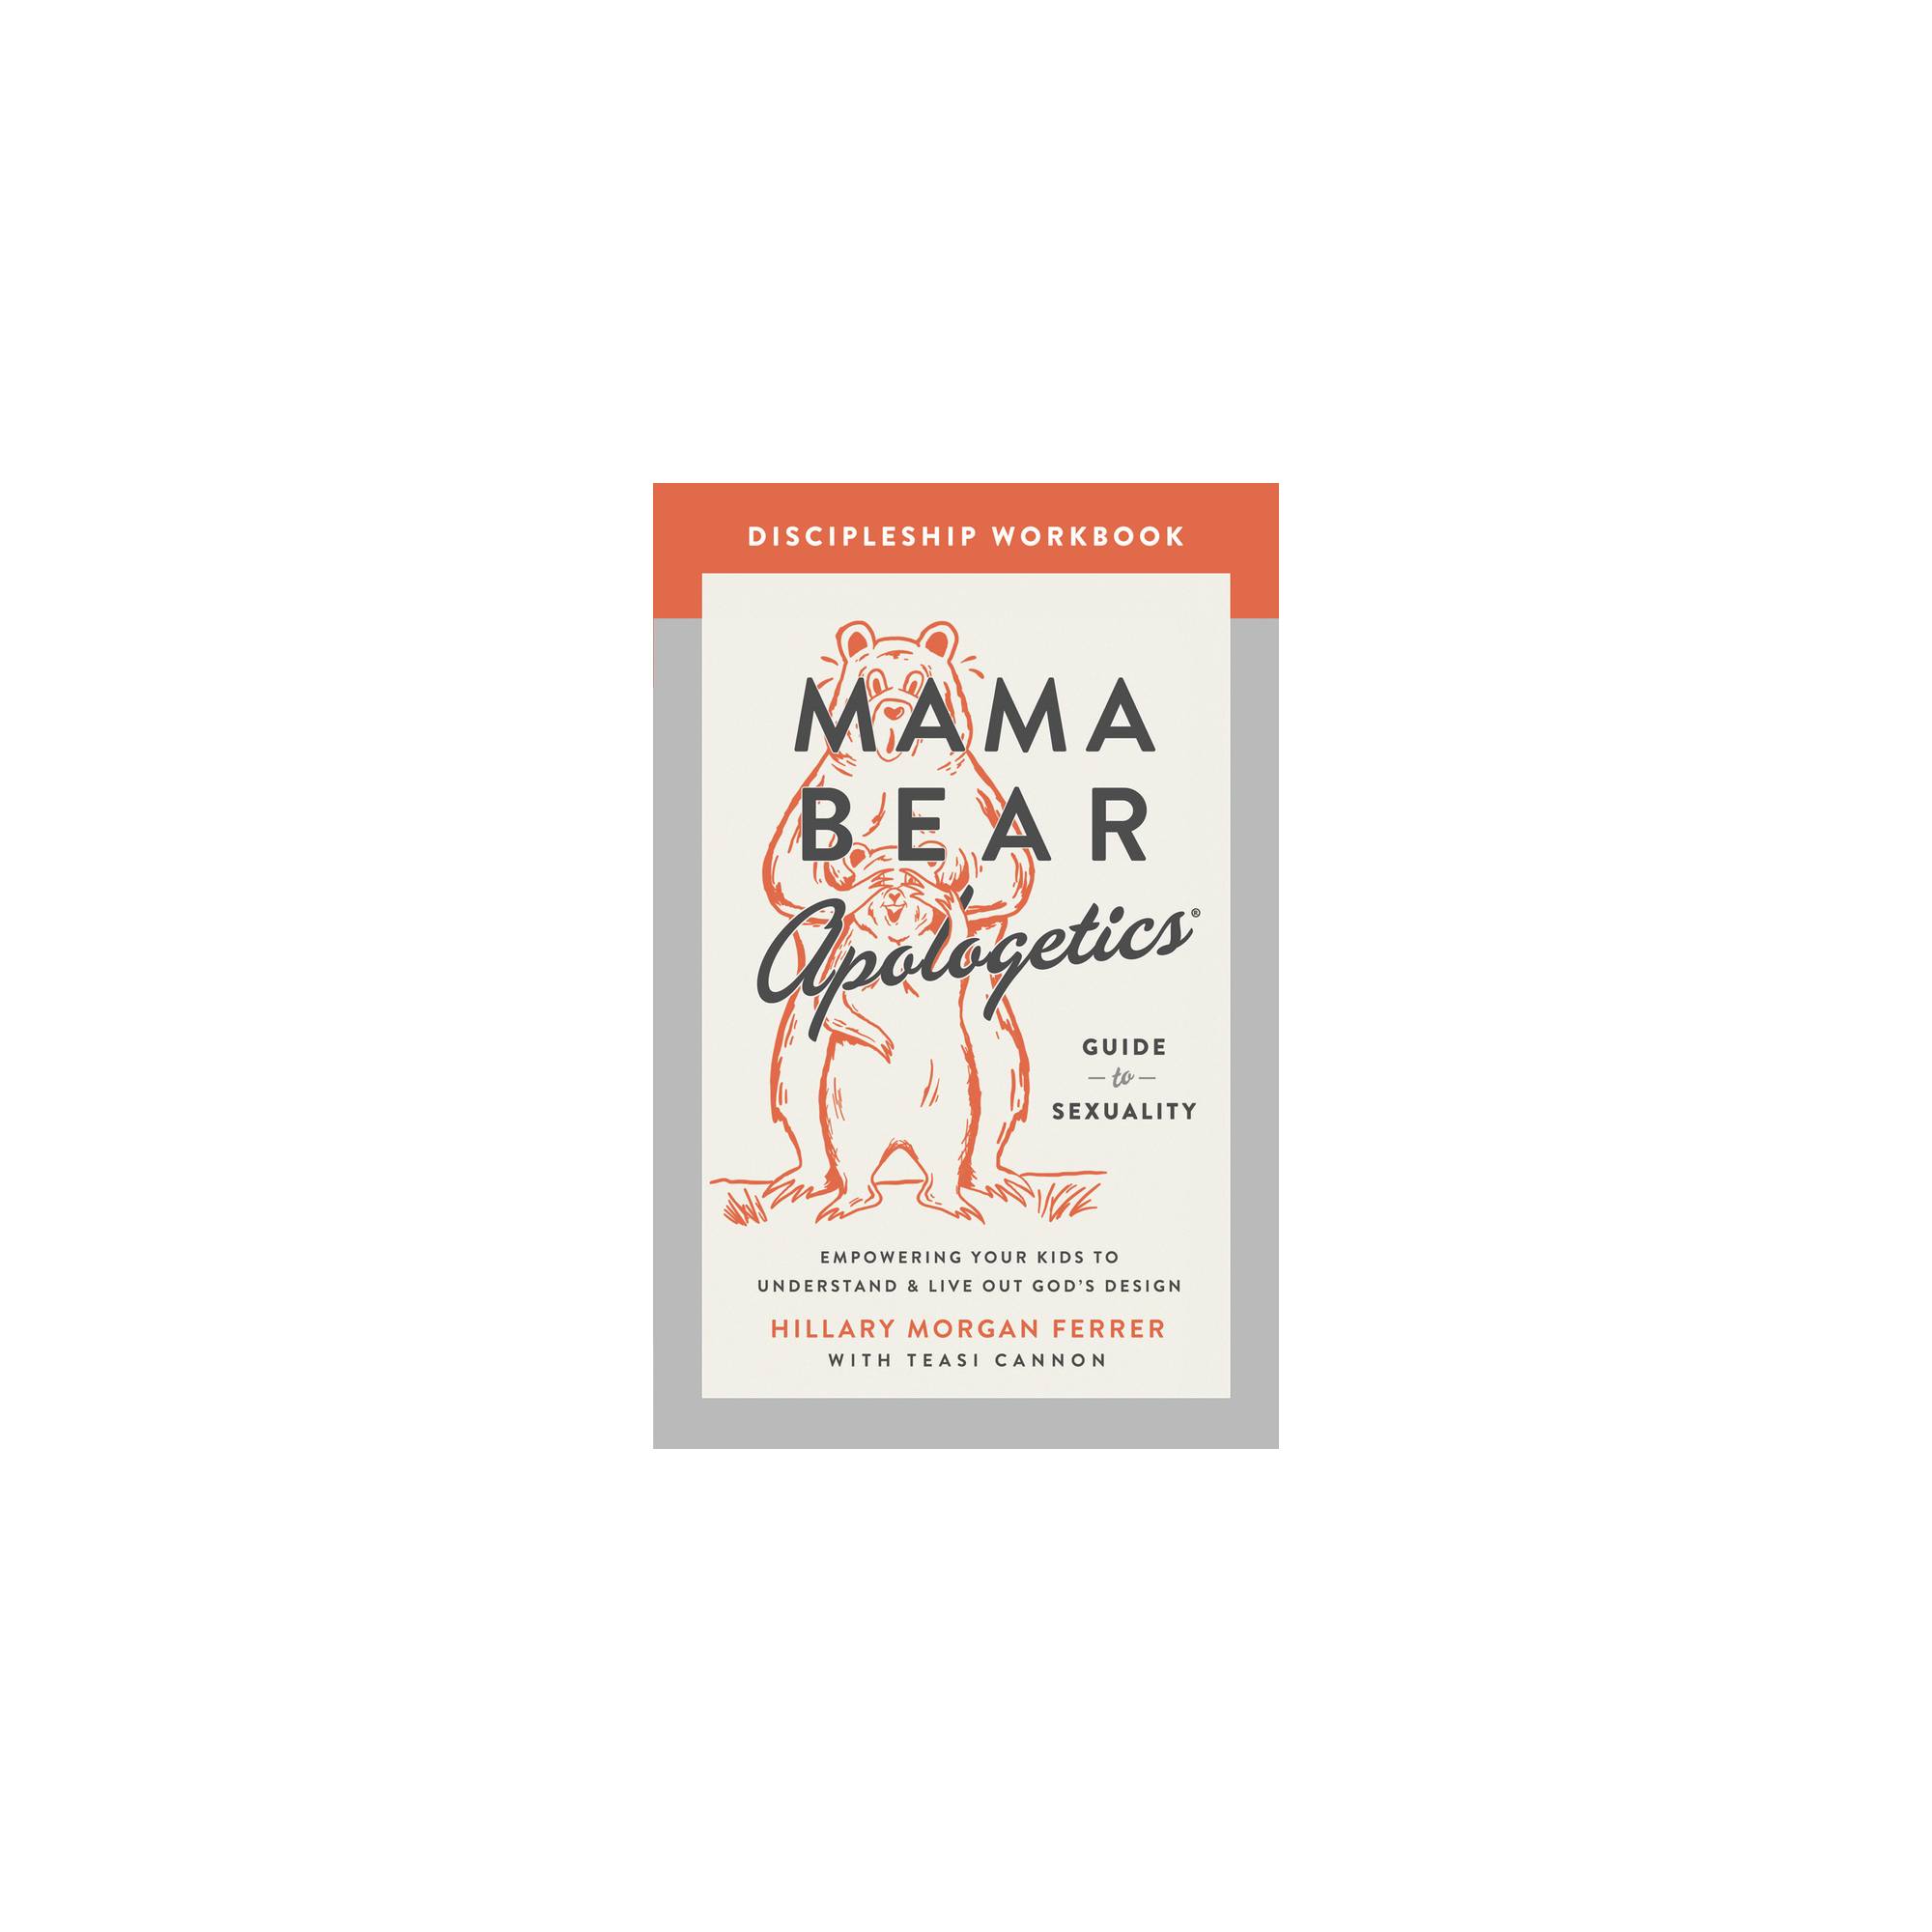 Mama Bear Apologetics Guide to Sexuality: Empowering Your Kids to  Understand and Live Out God's Design by Hillary Morgan Ferrer, Paperback